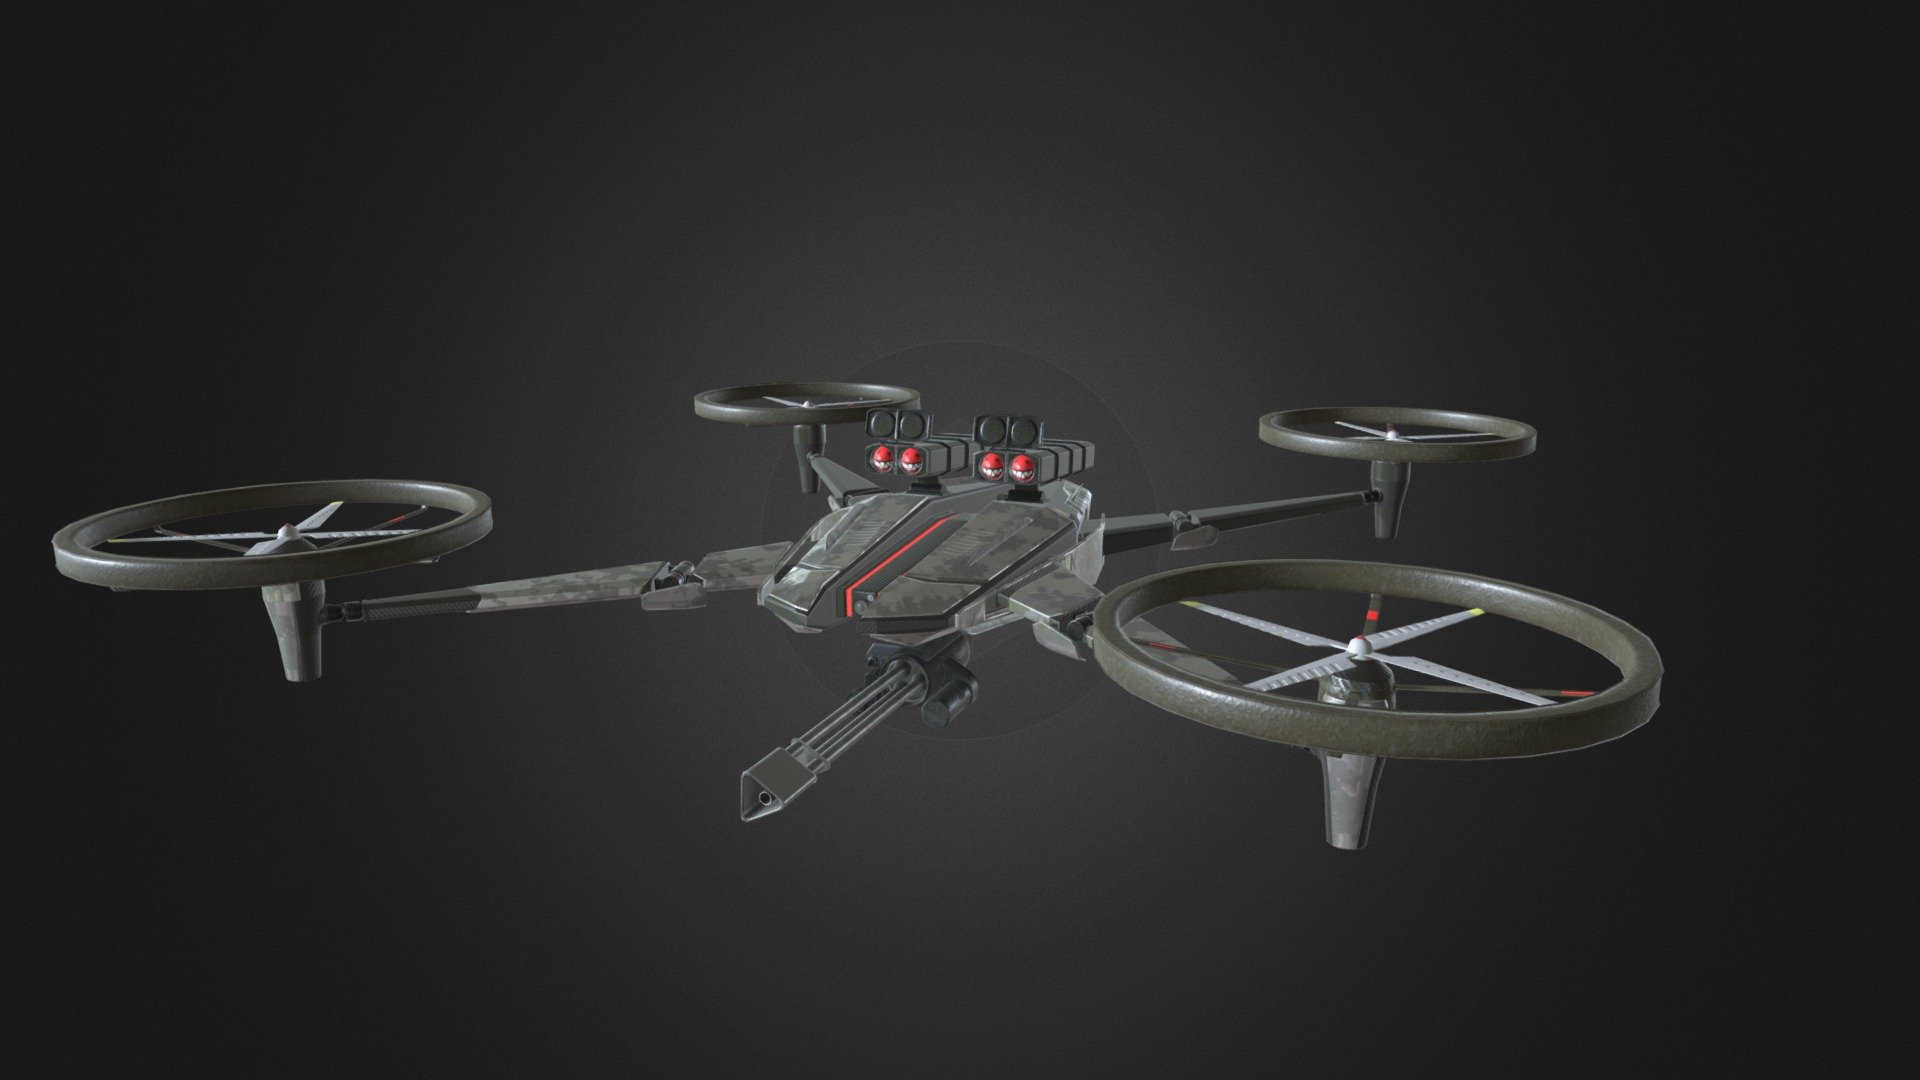 Gameready lowpoly assault drone with 4k PBR textures

11k tris - Gameready assault drone - Buy Royalty Free 3D model by Dissomnia 3d model